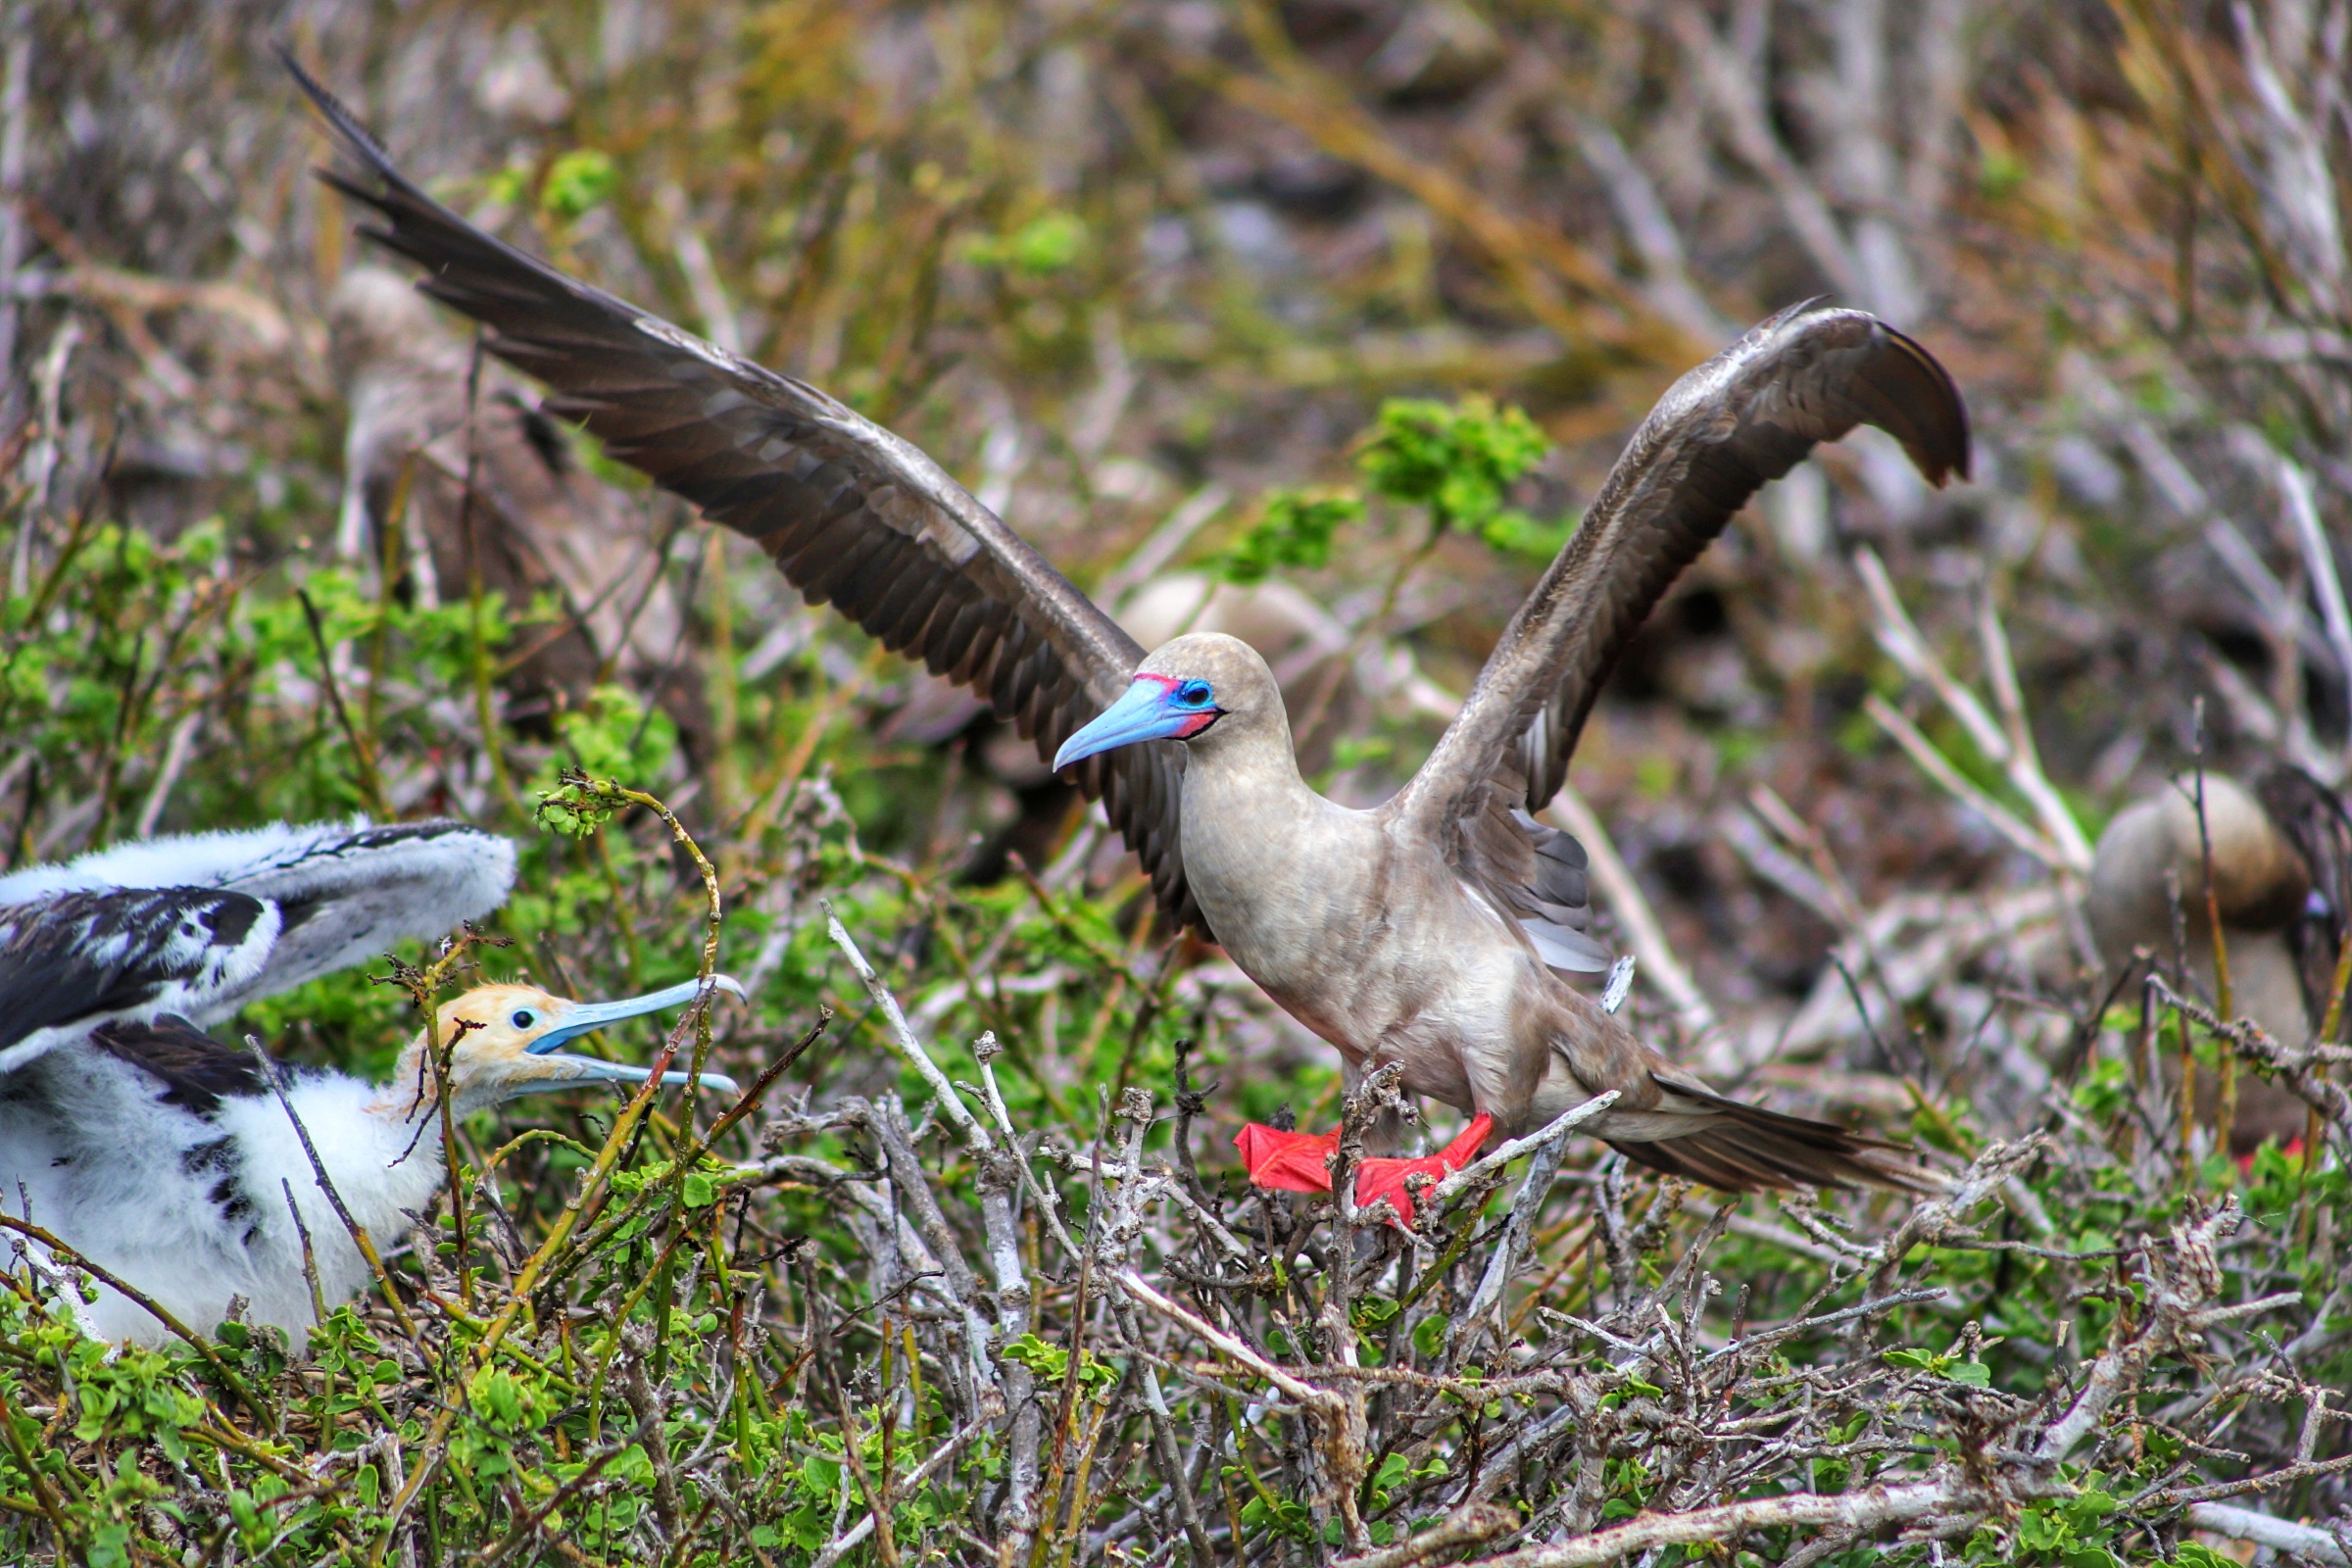 A red-footed boobie